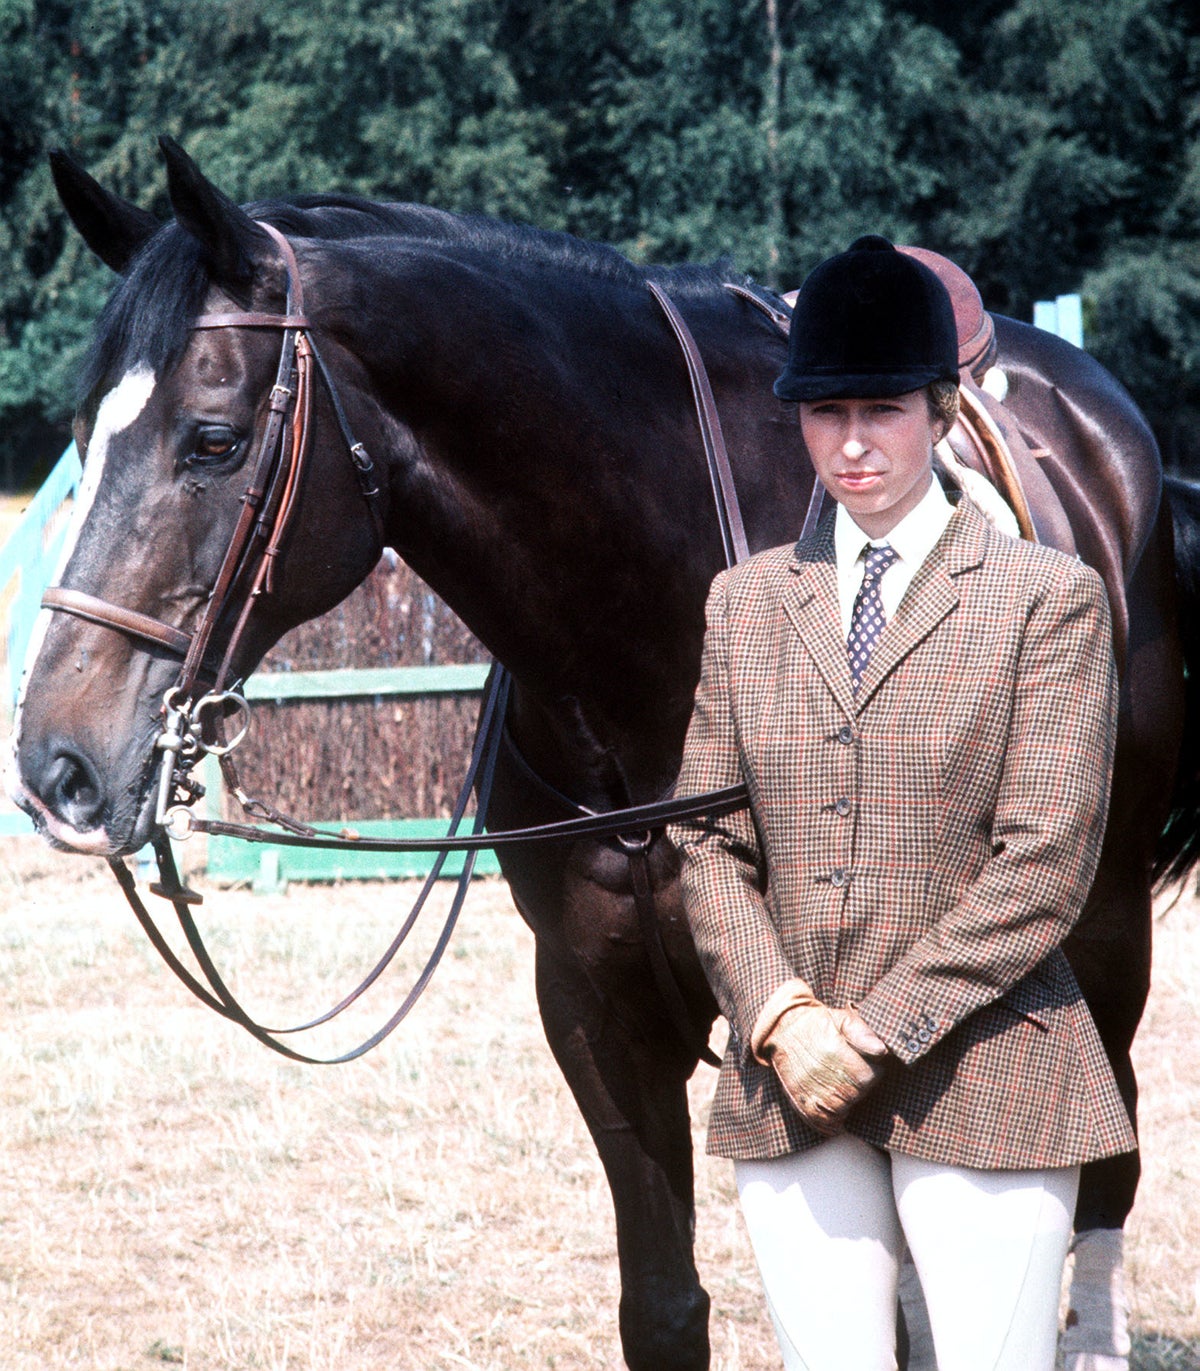 Princess Anne suffered previous concussion from horse while competing in the Olympic Games